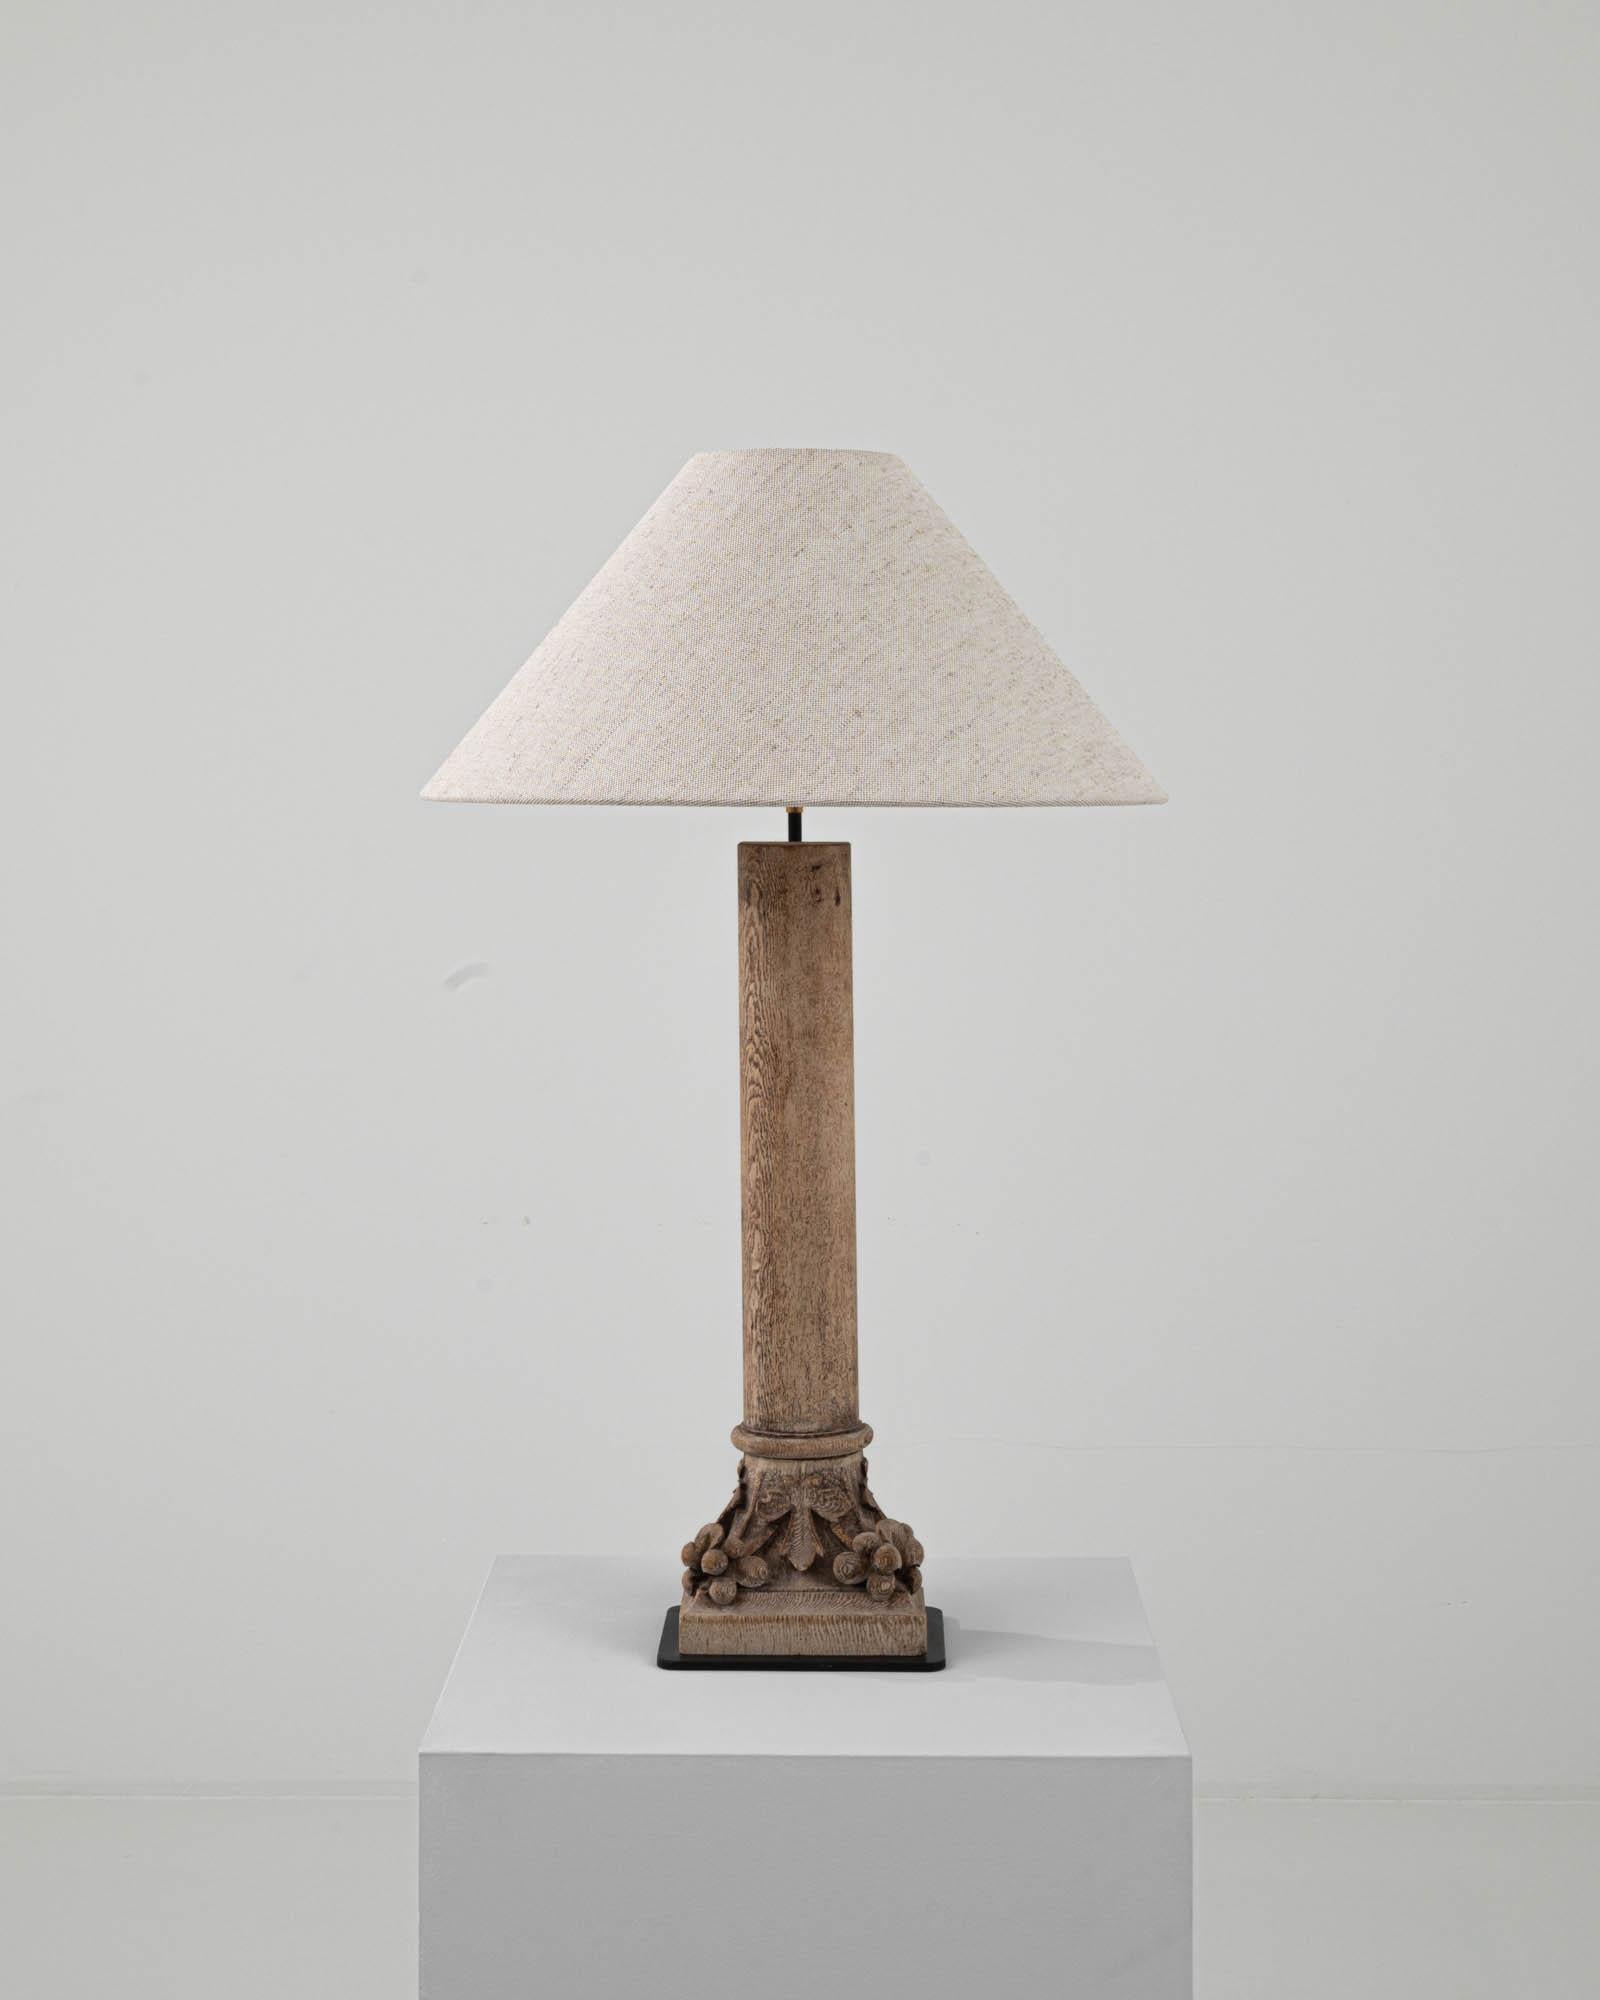 Crafted in 19th-century France, this antique lamp showcases a delicately carved wooden base adorned with exquisite foliate and bow motifs. The captivating oak wood patterns create a visually appealing and textured surface. The linen lampshade